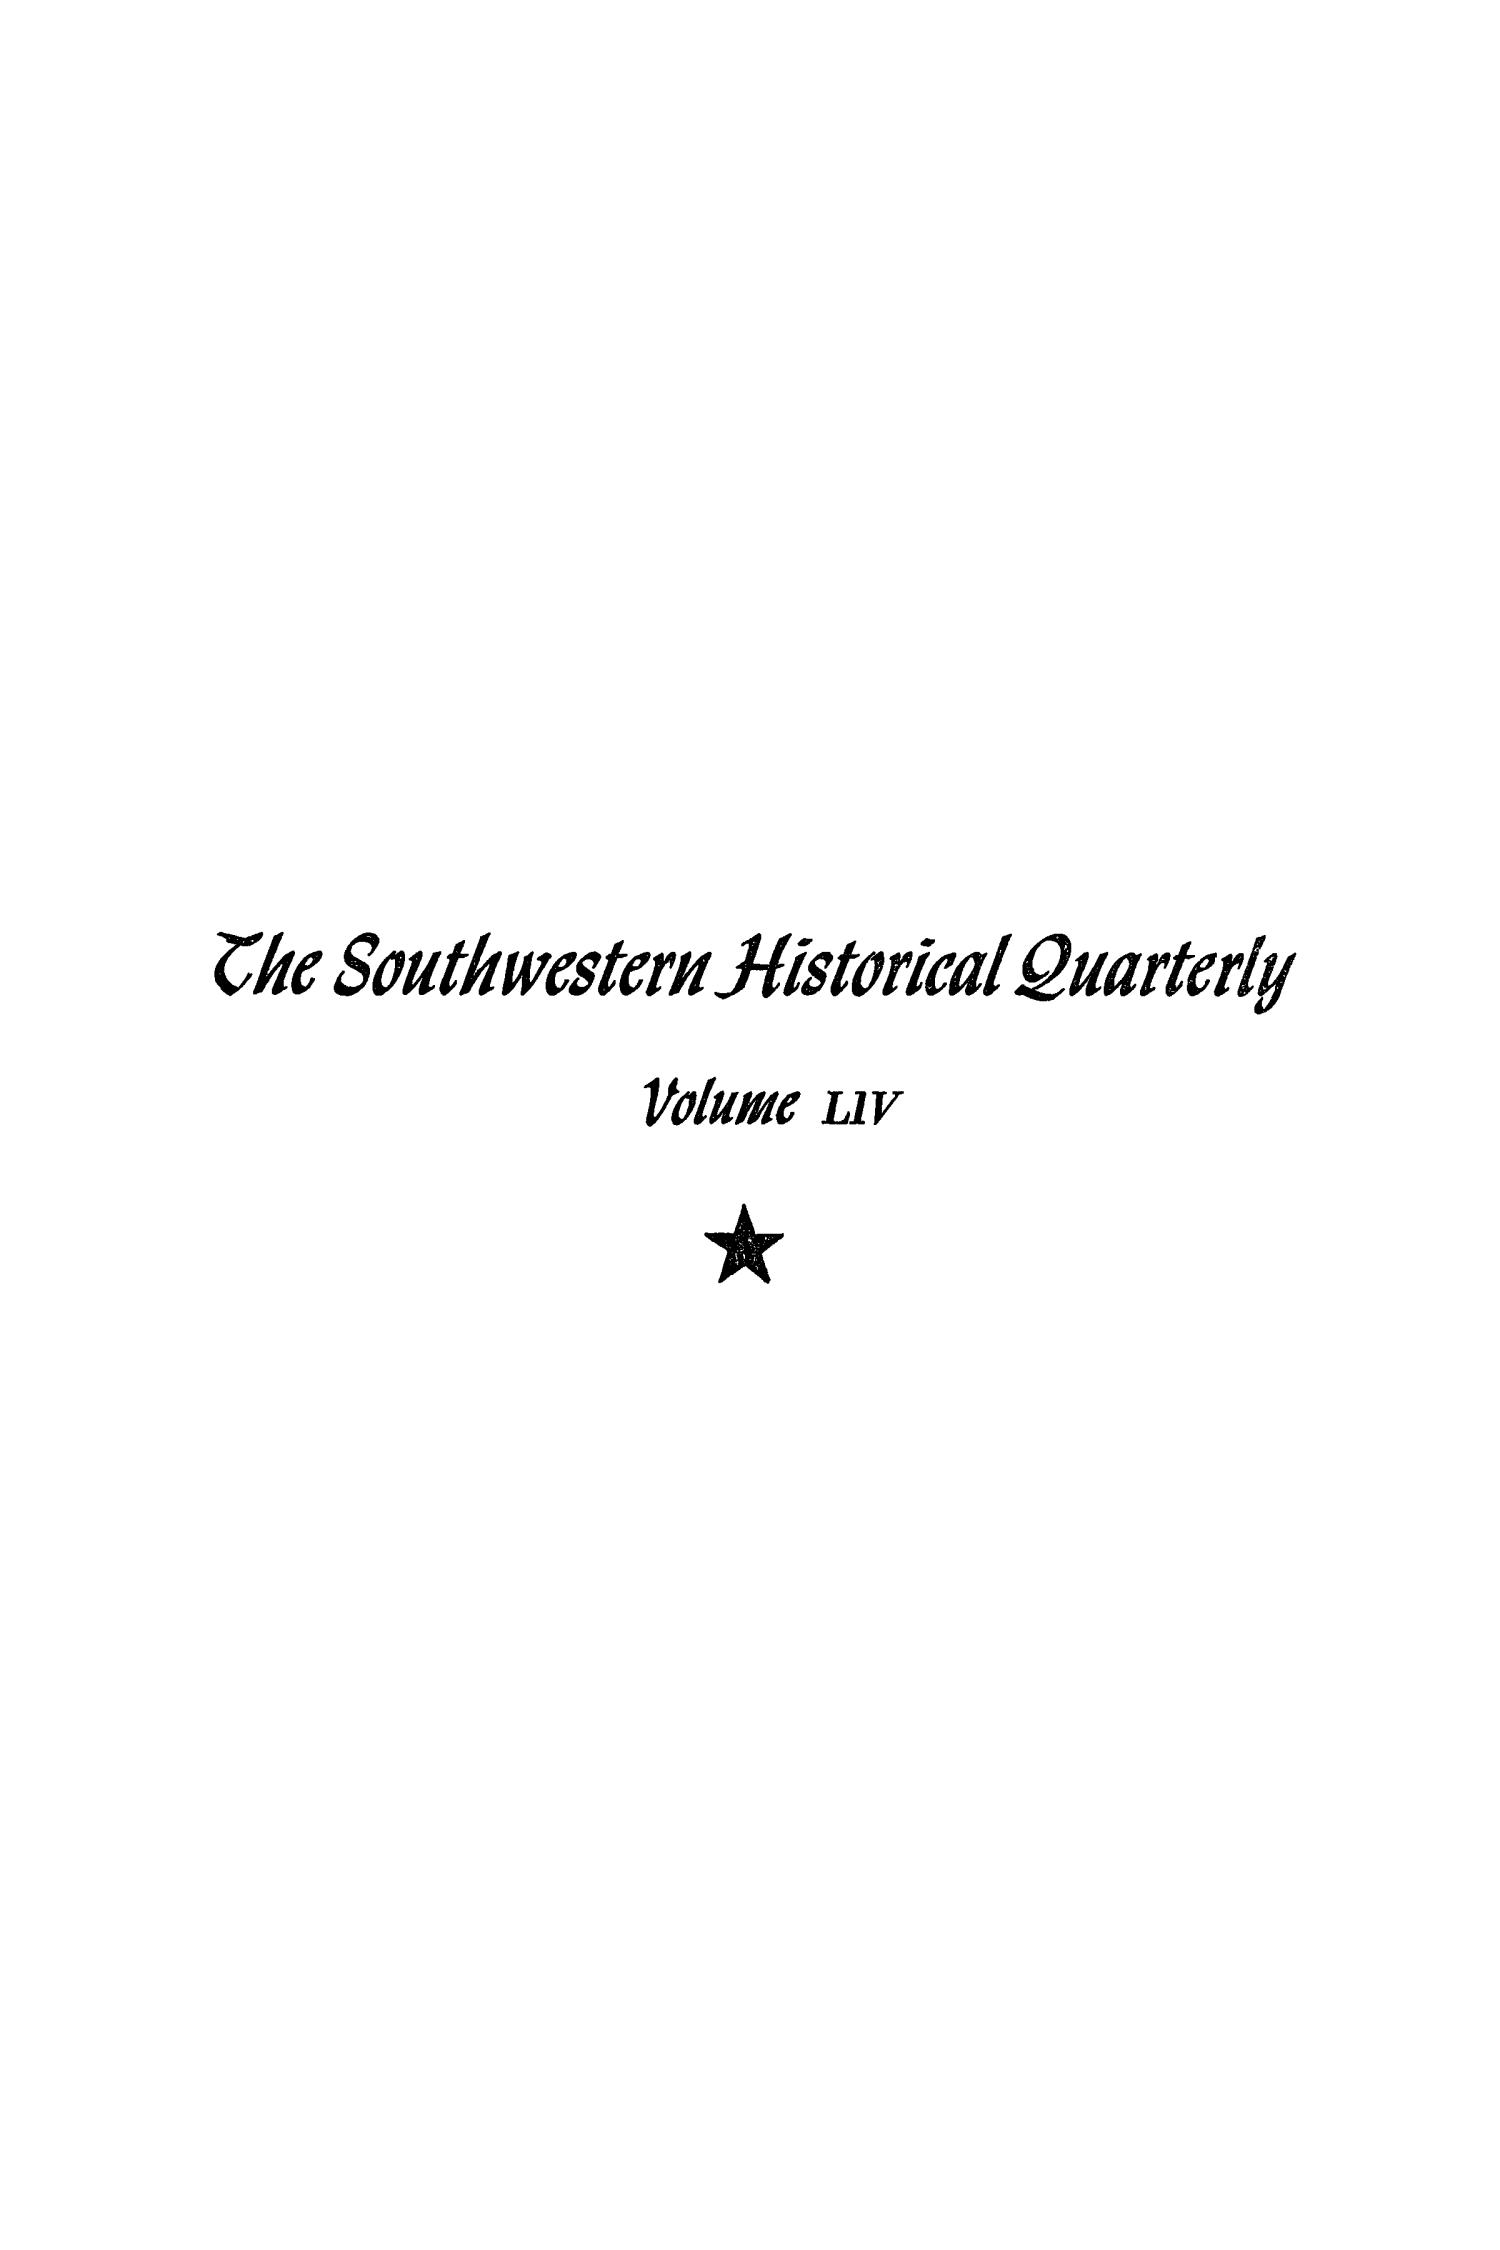 The Southwestern Historical Quarterly, Volume 54, July 1950 - April, 1951
                                                
                                                    Front Cover
                                                